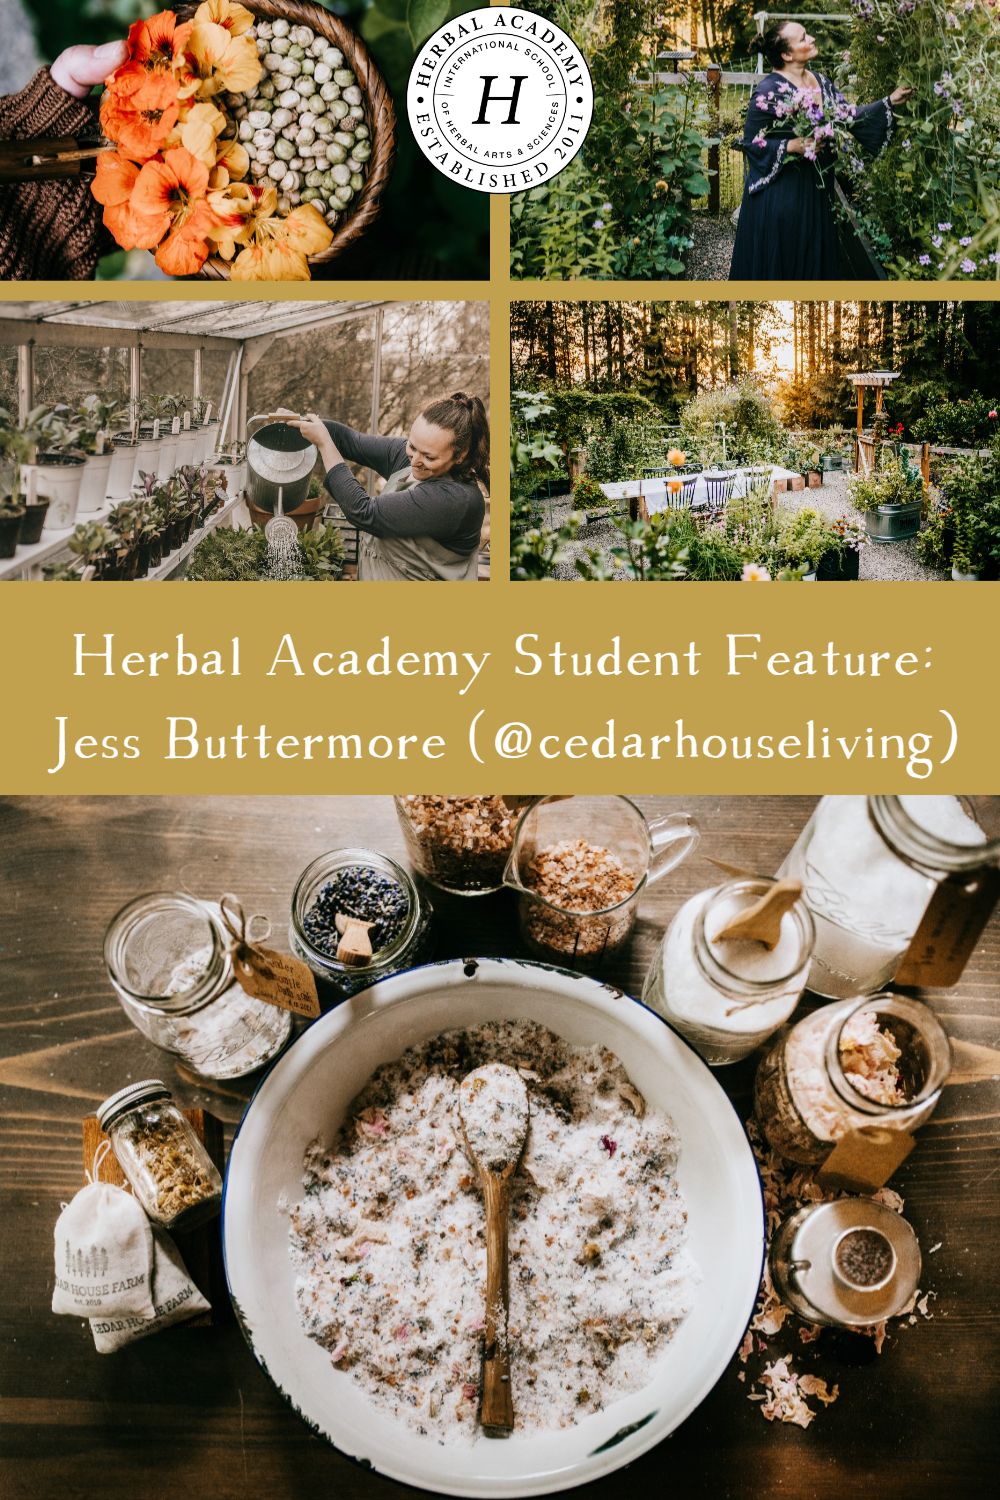 Herbal Academy Student Interview: Jess Buttermore (@cedarhouseliving) | Herbal Academy | We interviewed Jess Buttermore of Cedar House Living, where she shares her gardening and crafting skills, and sells seasonal living items.